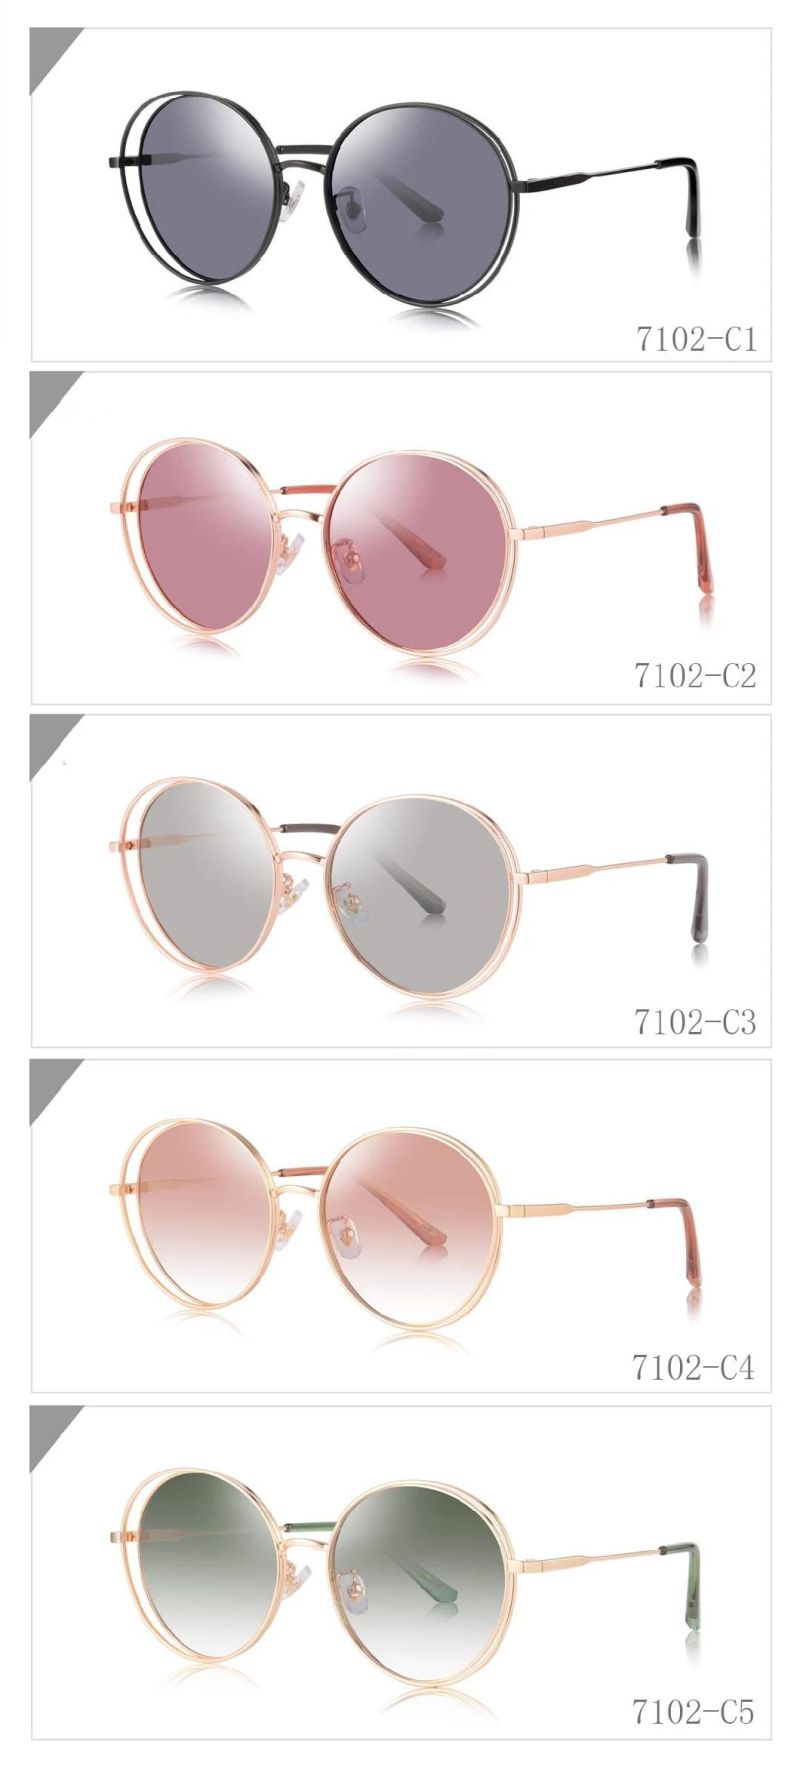 New Candy Color Metal Polarized Sunglasses Manufacturers Direct Sales of Popular Styles